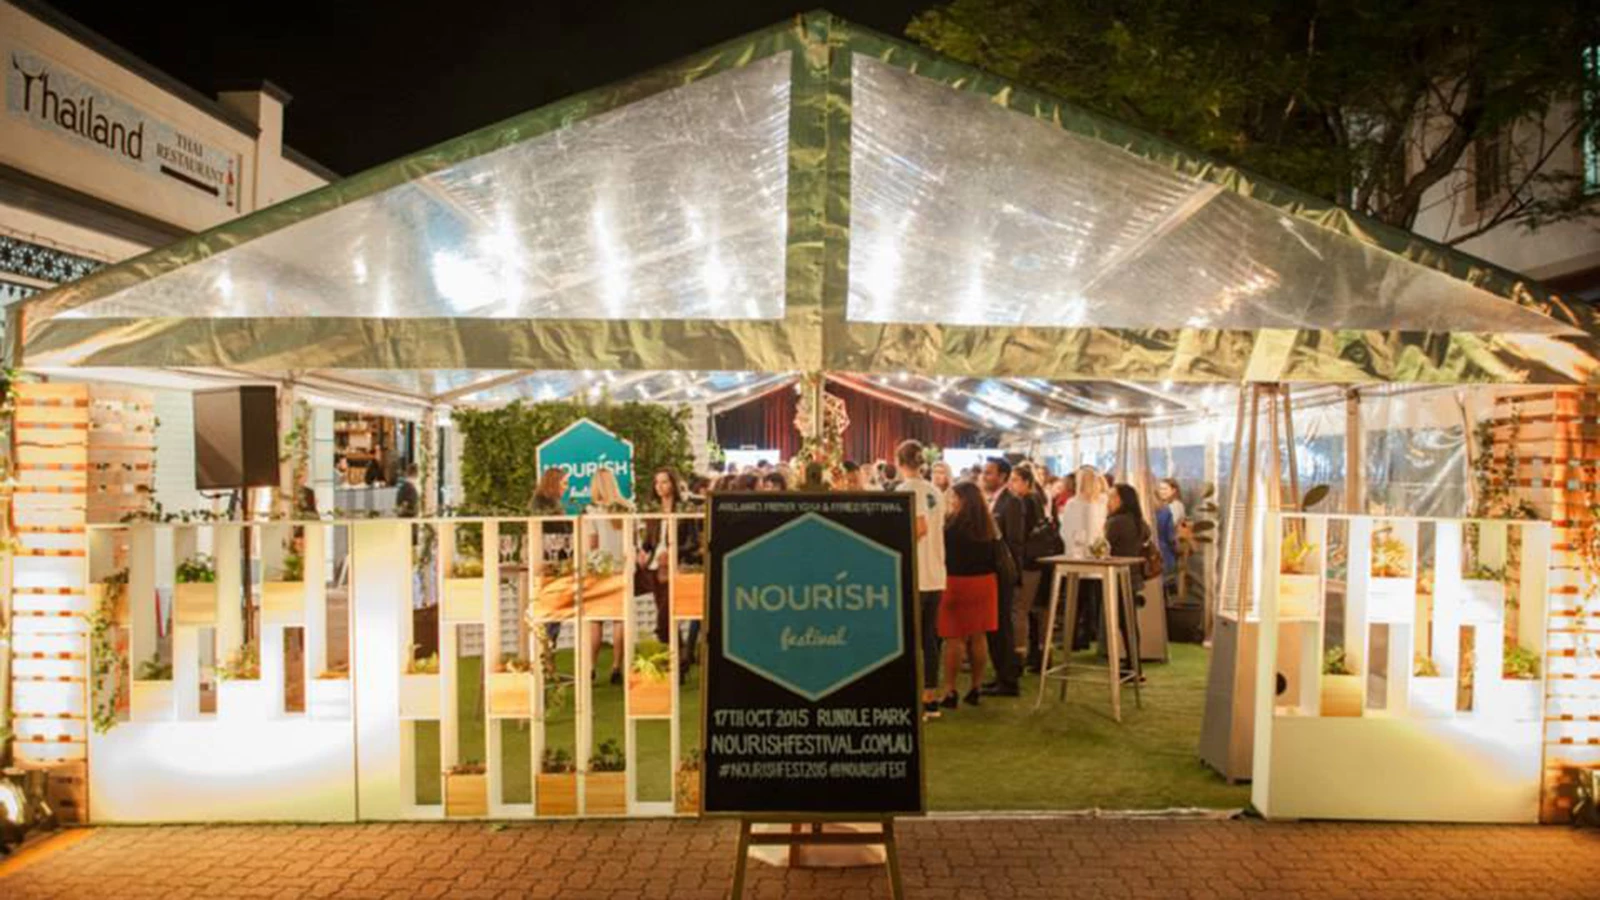 Nourish Festival event signage tent and chalkboard.